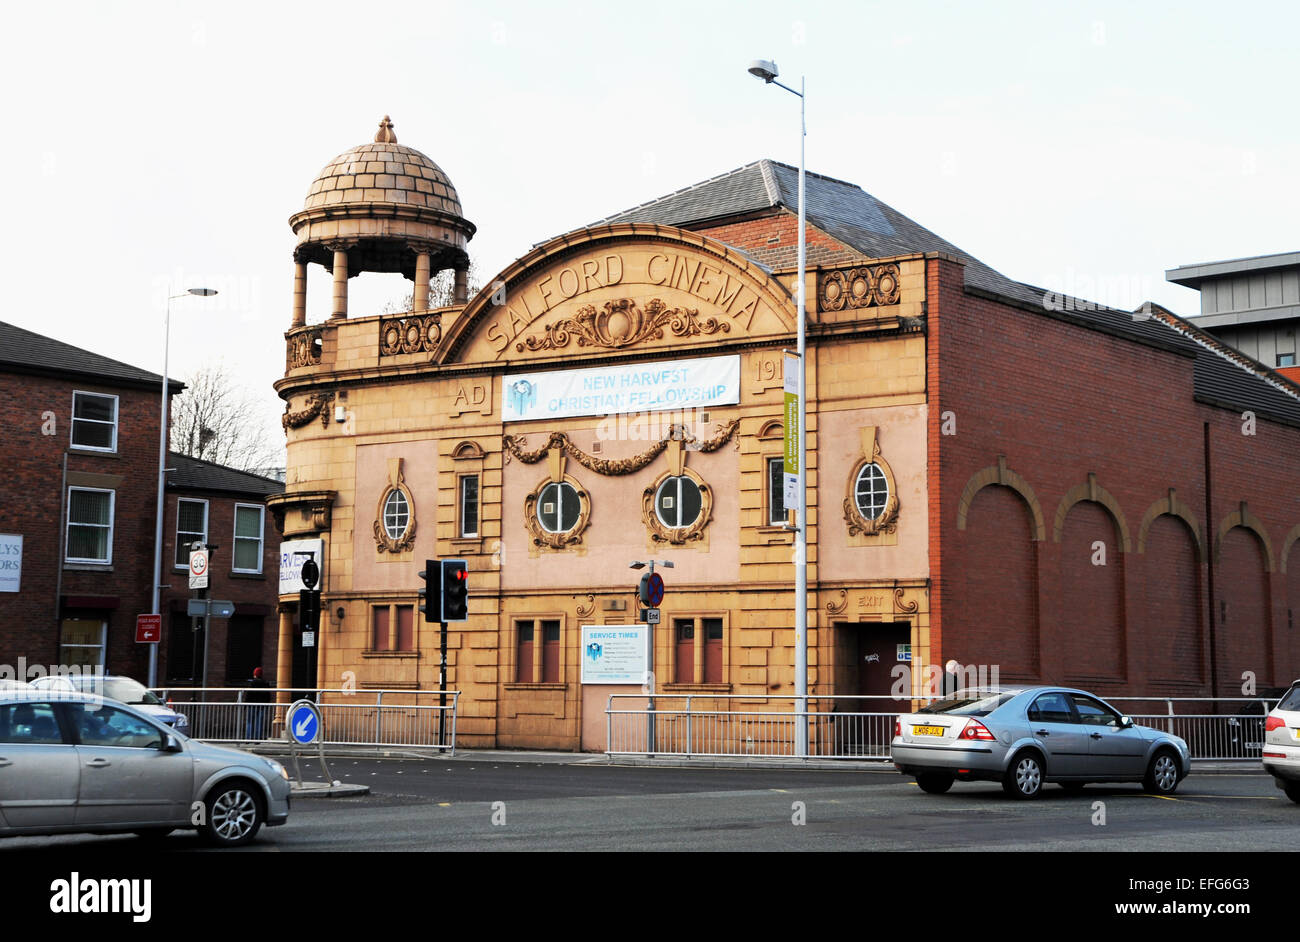 Salford Manchester Lancashire UK - The old Salford Cinema now the New harvest Christian Fellowship church Stock Photo